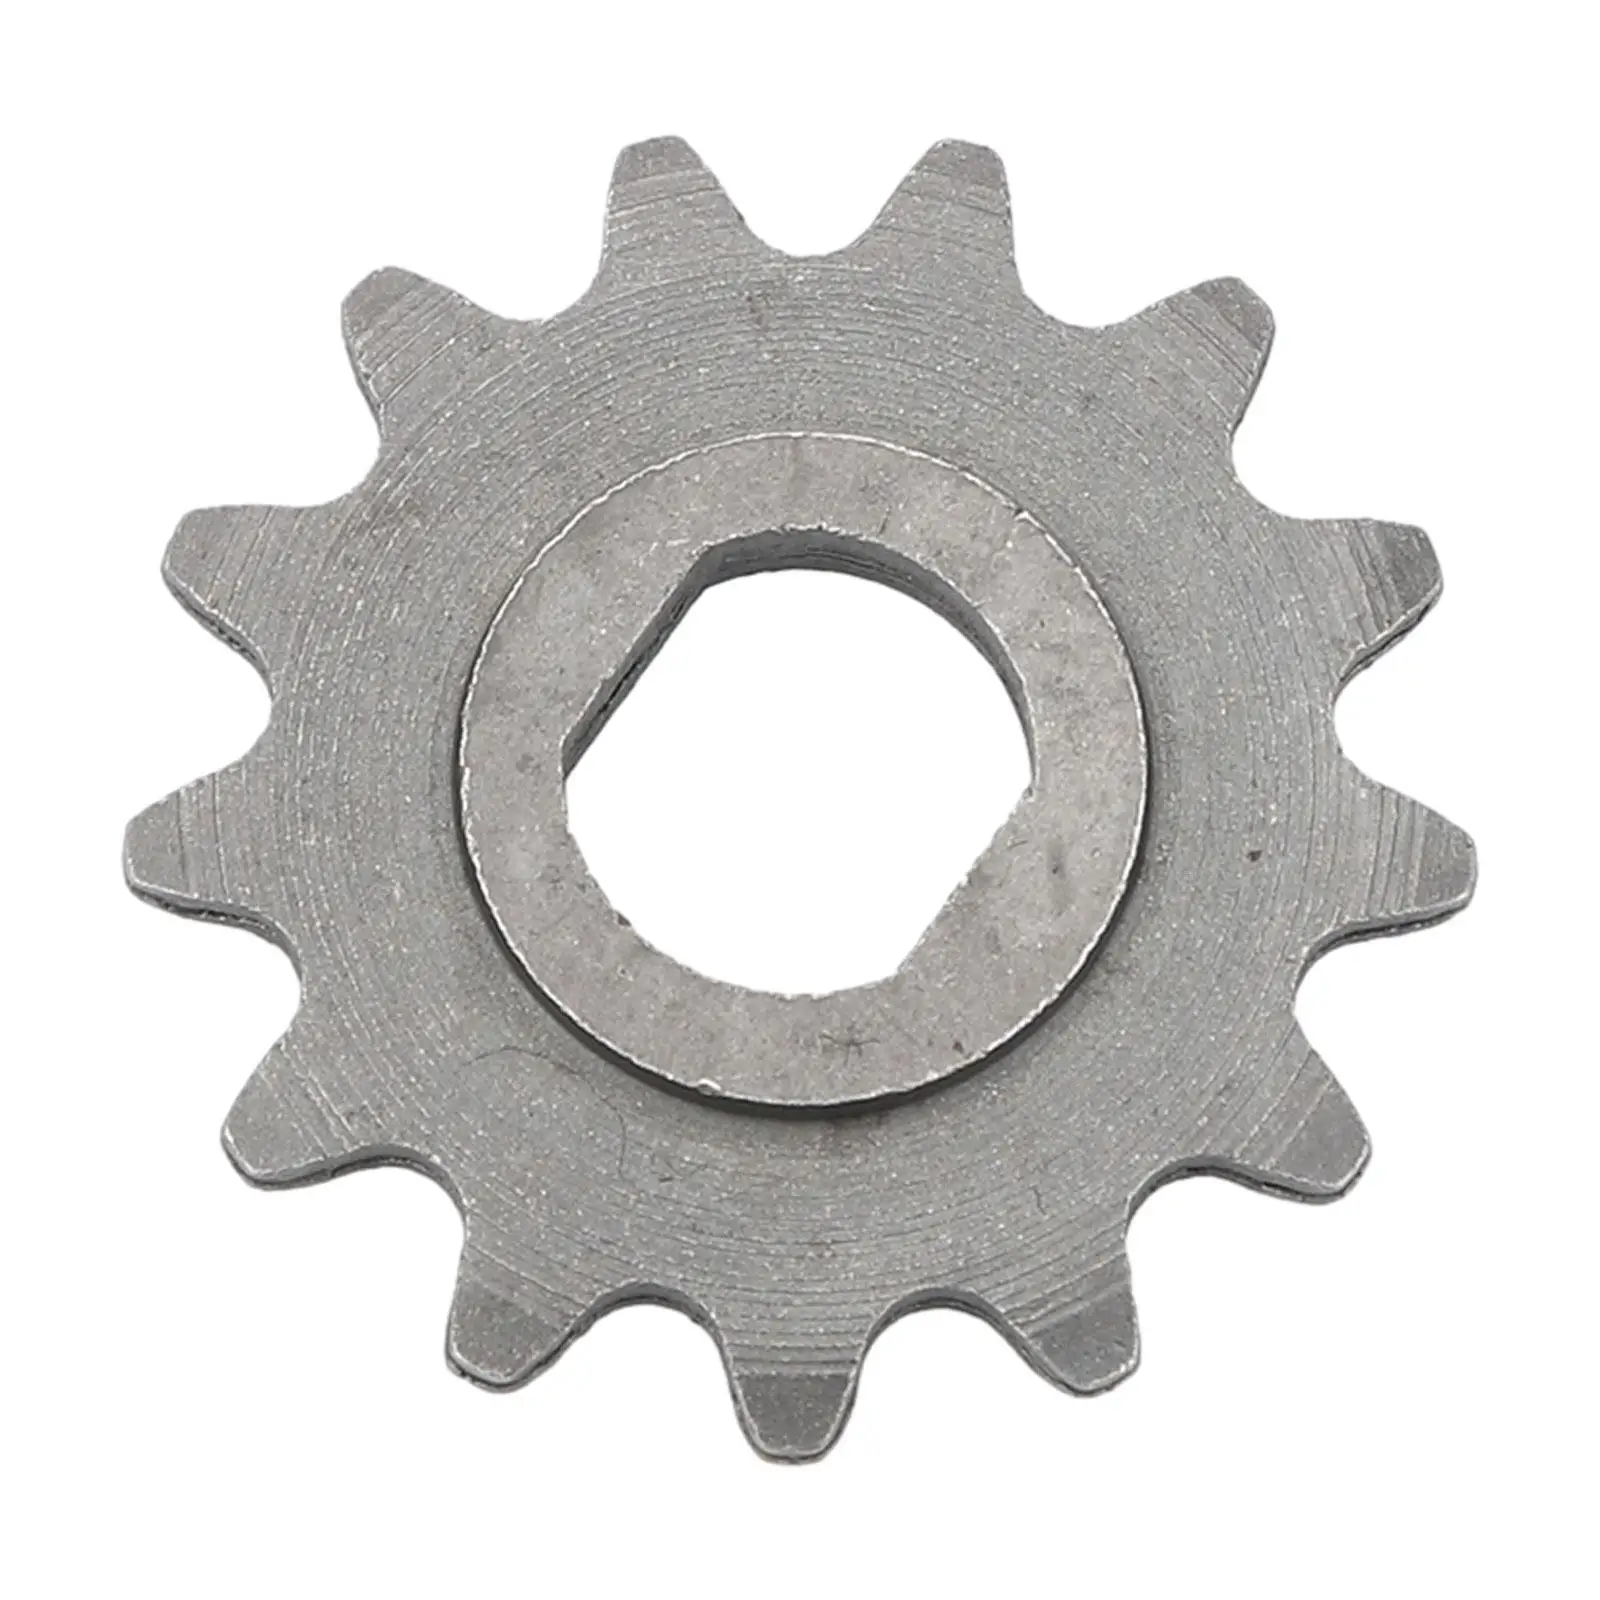 My1020 Chain Motor Sprocket Chain Wheel for Electric Scooter Repair Set